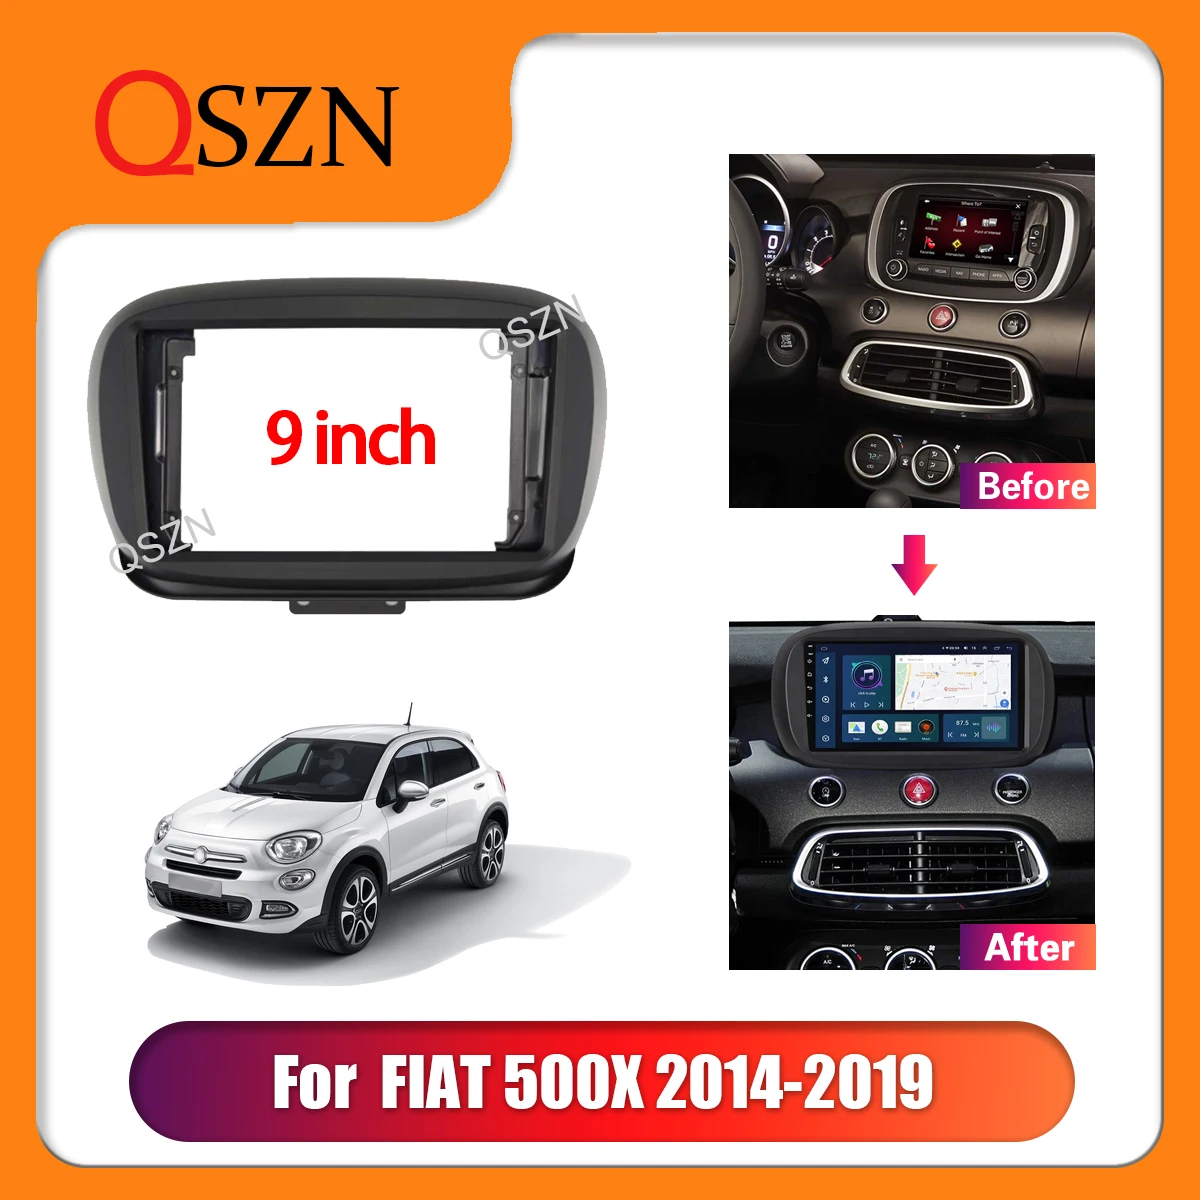 

QSZN 9 inch Car radio Frame Fascia For Fiat 500X 2014-2019 canbus DVD Trim Panel Dashboard Mount Kit 2 Din Installation Stereo